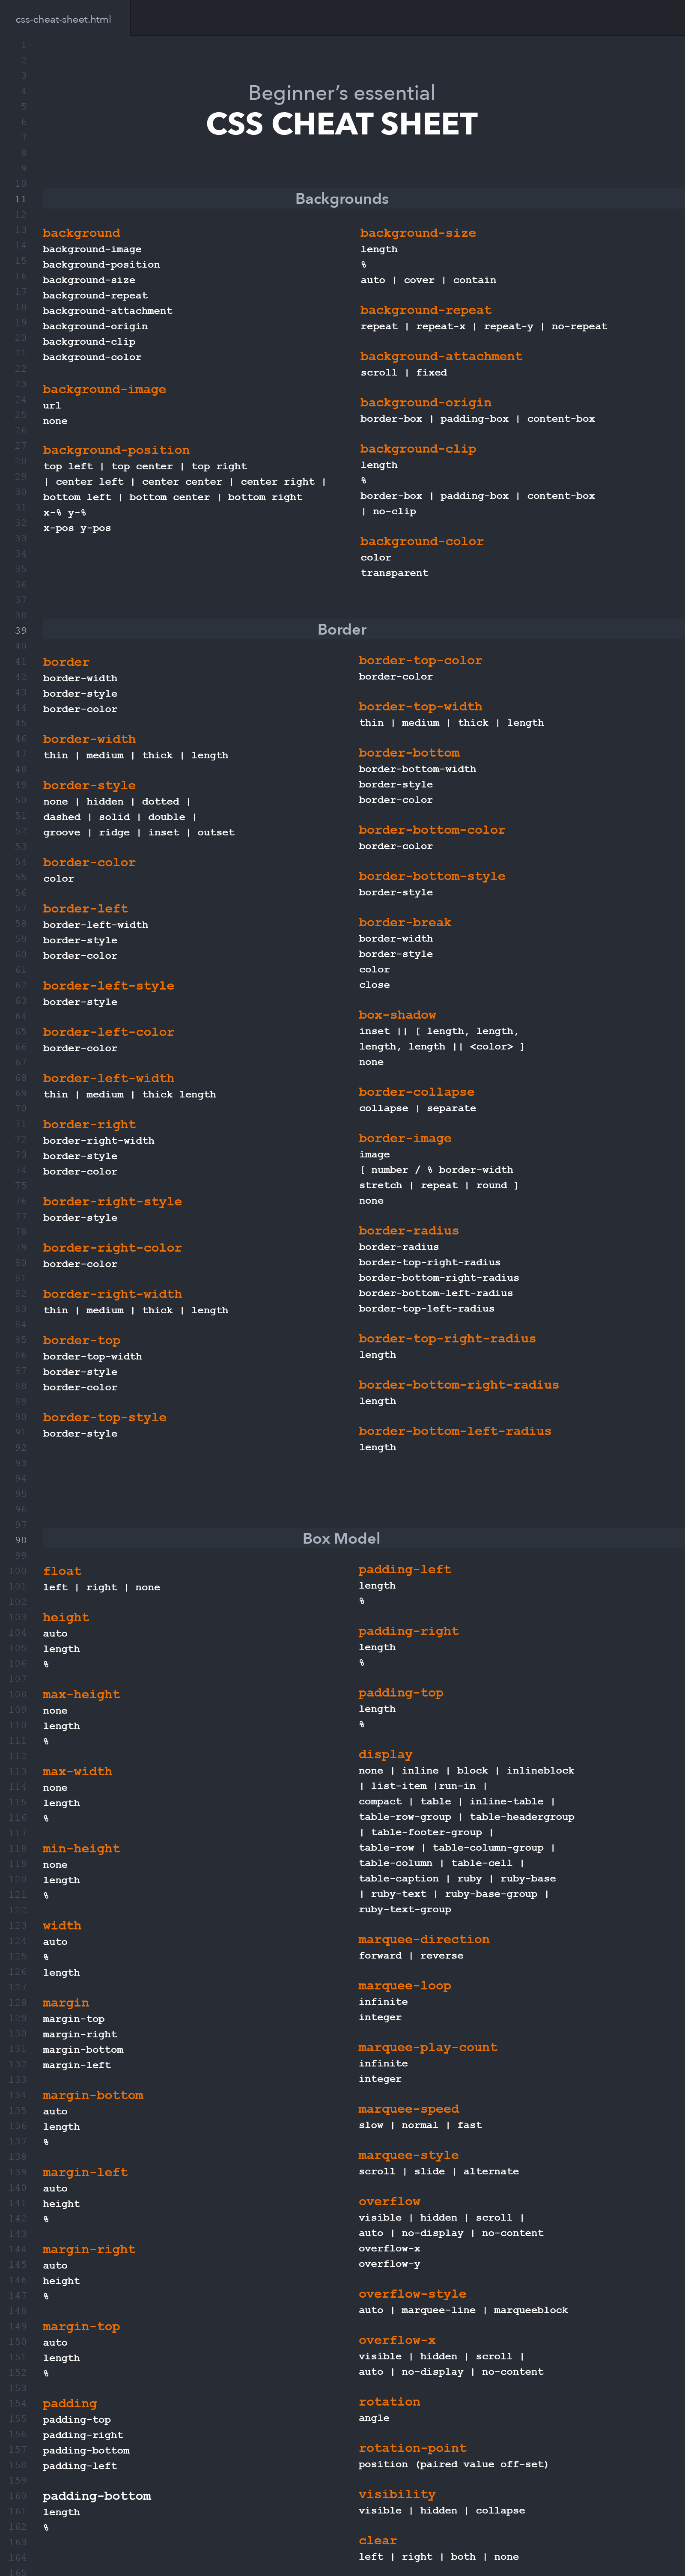 CSS3 cheat sheet - Page 1 of 4